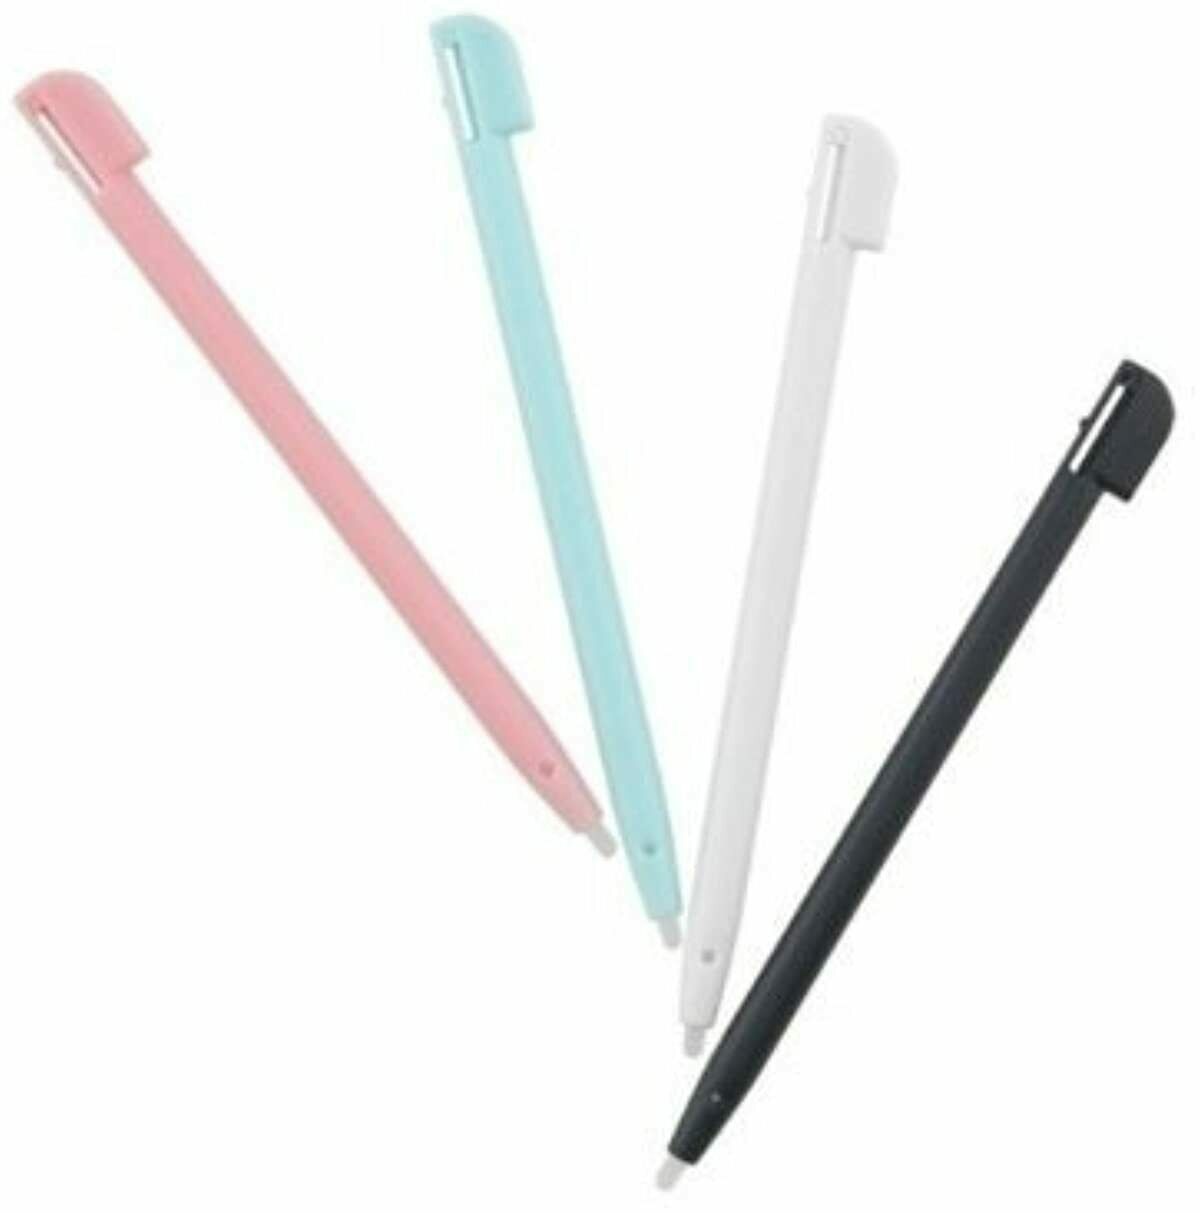 Zittop 4in1 Combo Stylus Styli Pen Set Multi Color For Nintendo Ds Lite